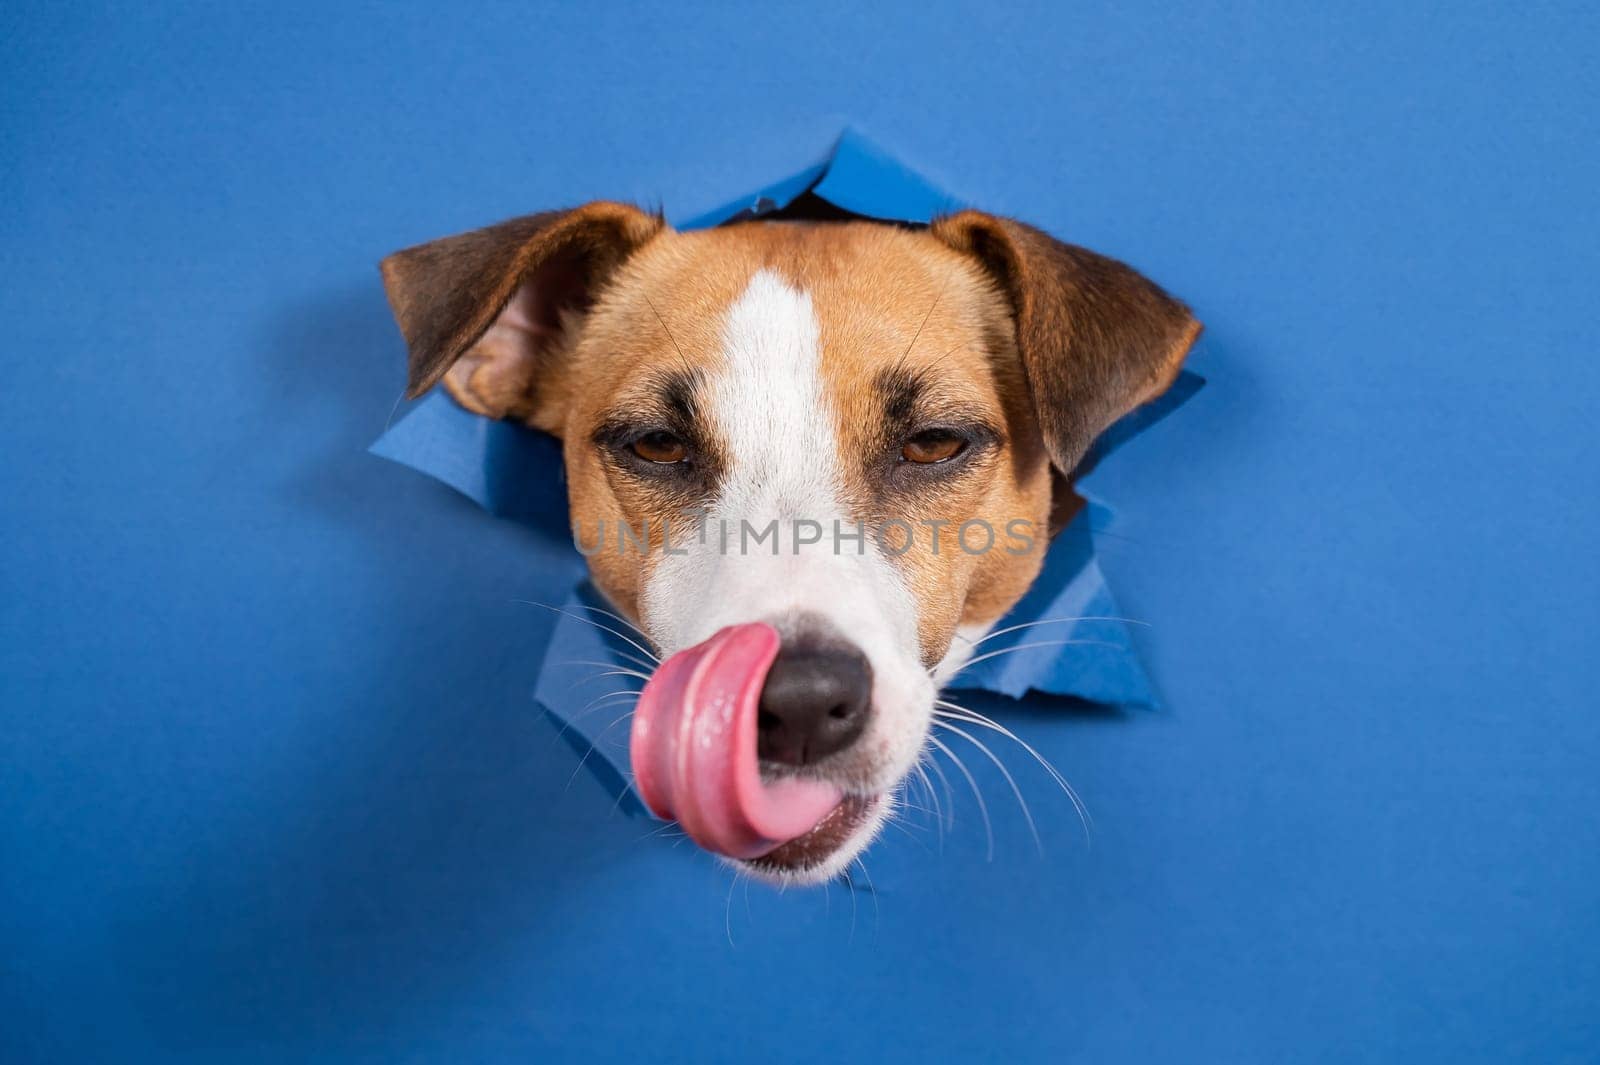 Funny dog jack russell terrier leans out of a hole in a paper blue background. by mrwed54